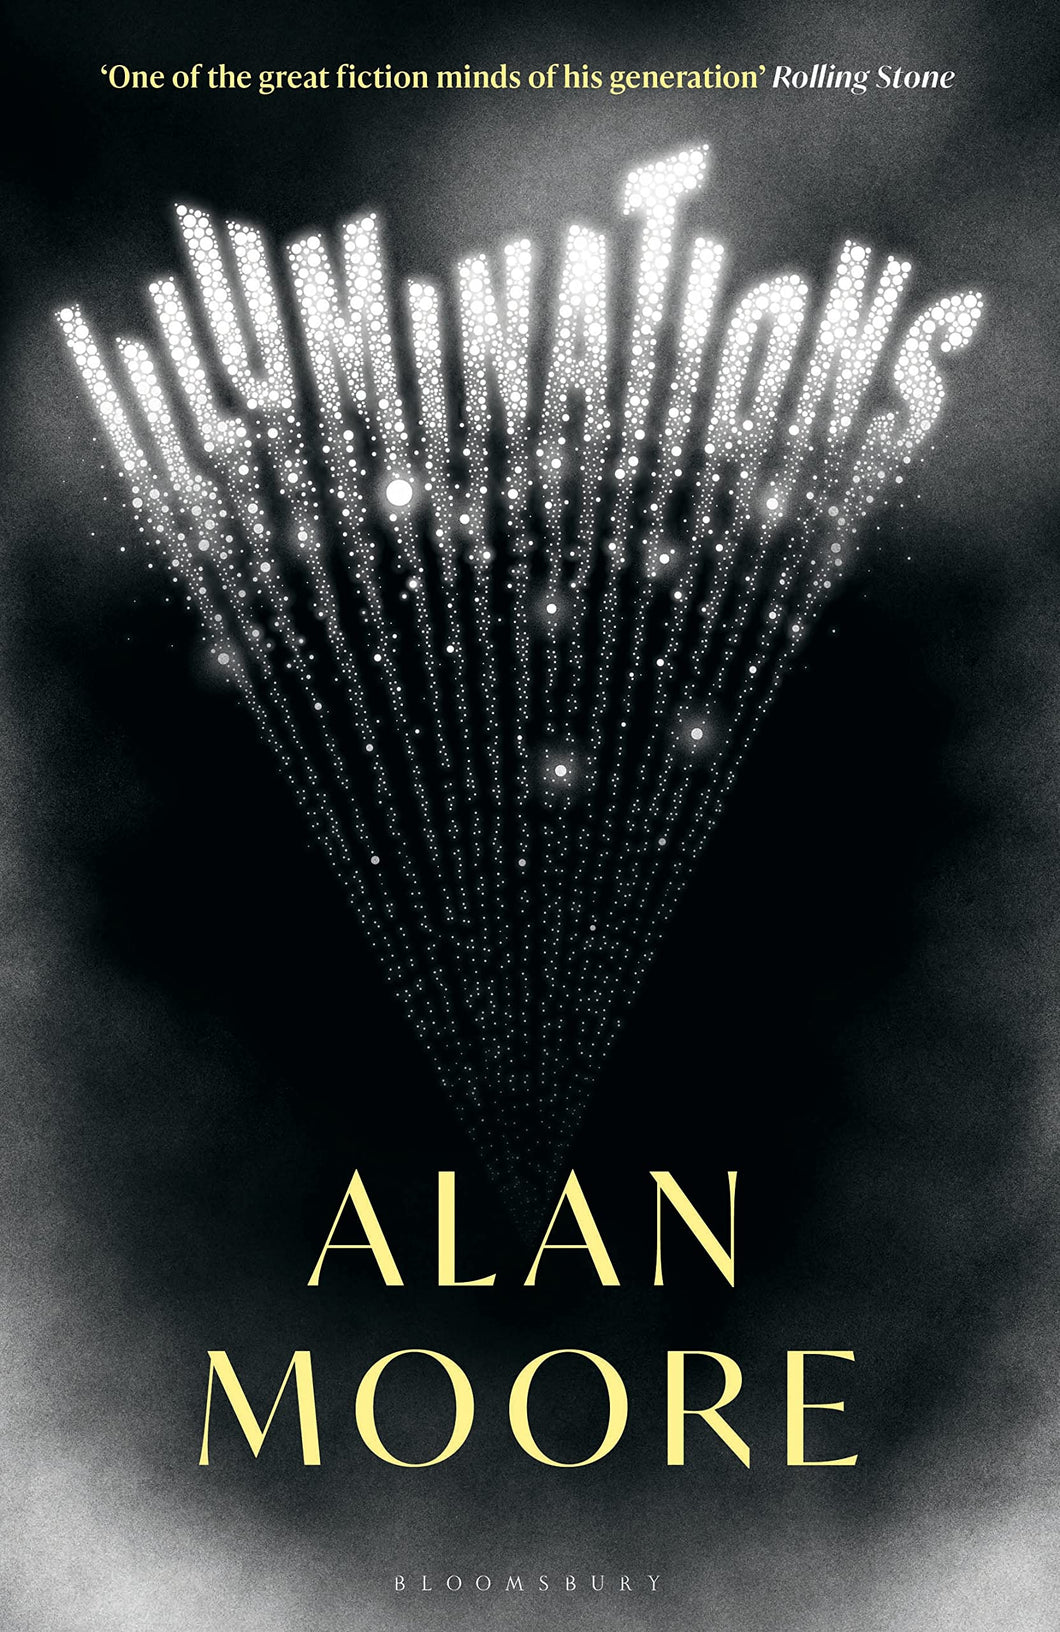 Illuminations: The Top 5 Sunday Times Bestseller Hardcover